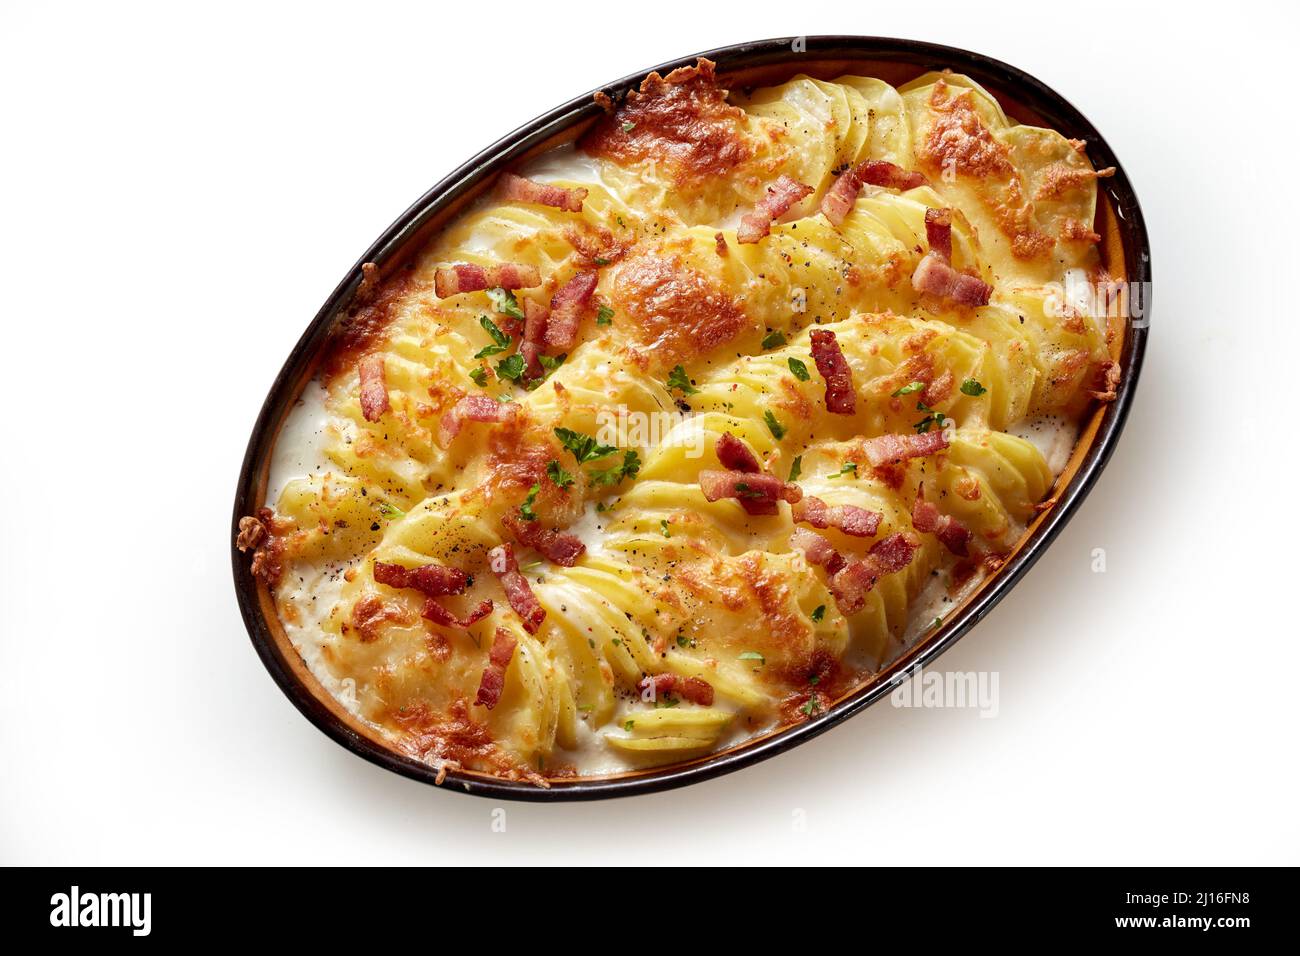 Top view of appetizing gratin with baked sliced potato and crispy bacon pieces baked in oval shaped pan placed on white background Stock Photo